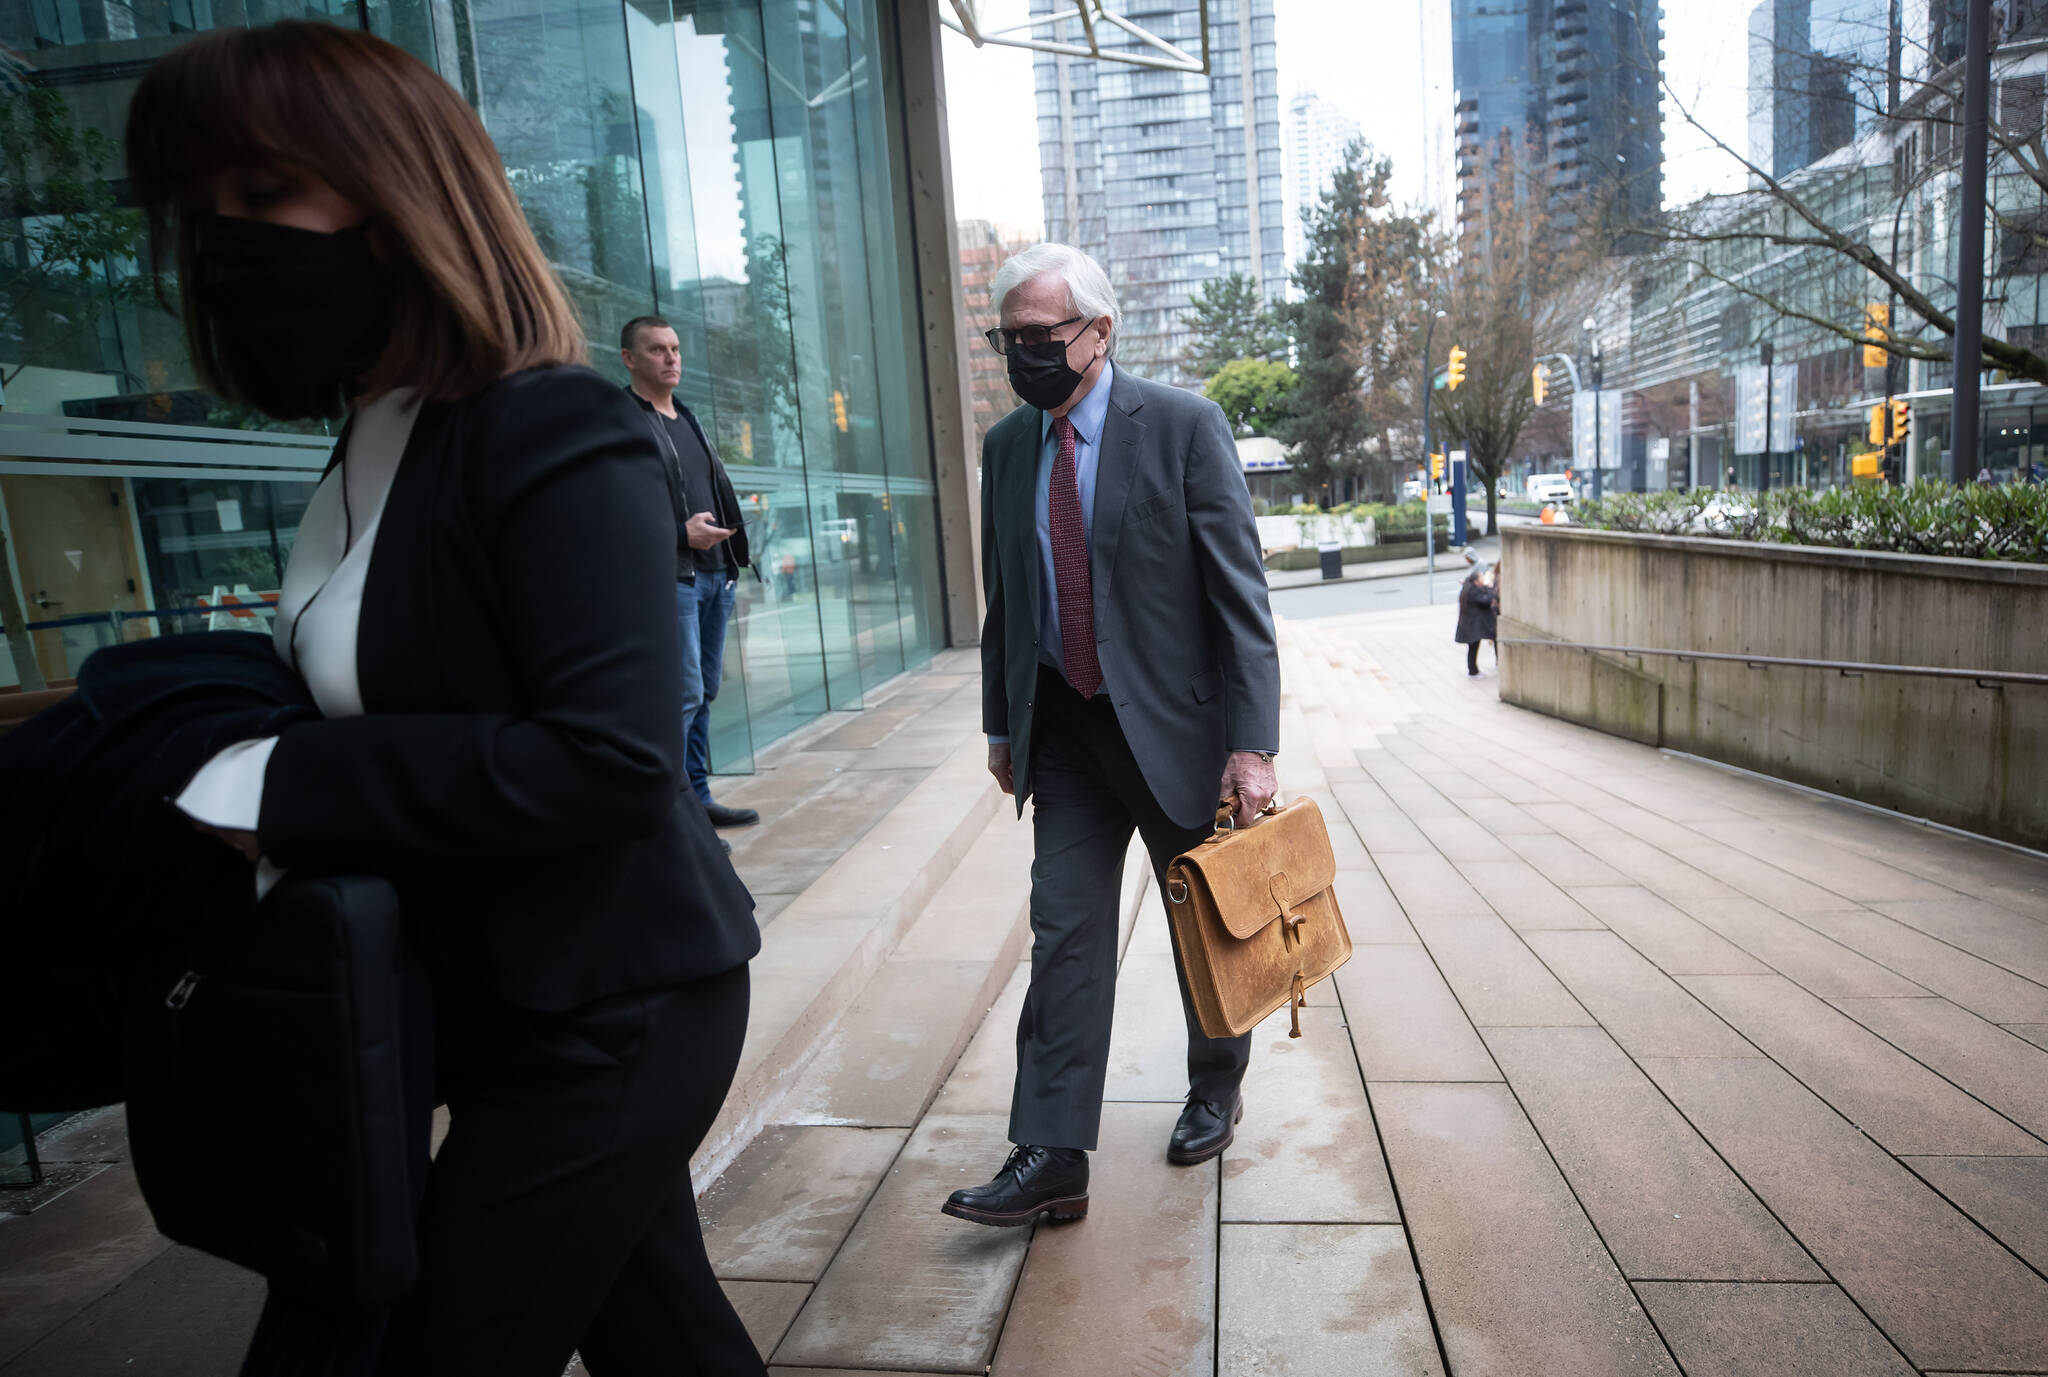 Craig James, former clerk of the B.C. legislative assembly, arrives back at B.C. Supreme Court after a break from his trial, in Vancouver, on Tuesday, March 1, 2022. A special prosecutor says British Columbia’s former clerk of the legislative assembly used public funds to enrich himself in "glaring and egregious" ways during closing arguments. James’s defence is expected to present its case Wednesday. THE CANADIAN PRESS/Darryl Dyck